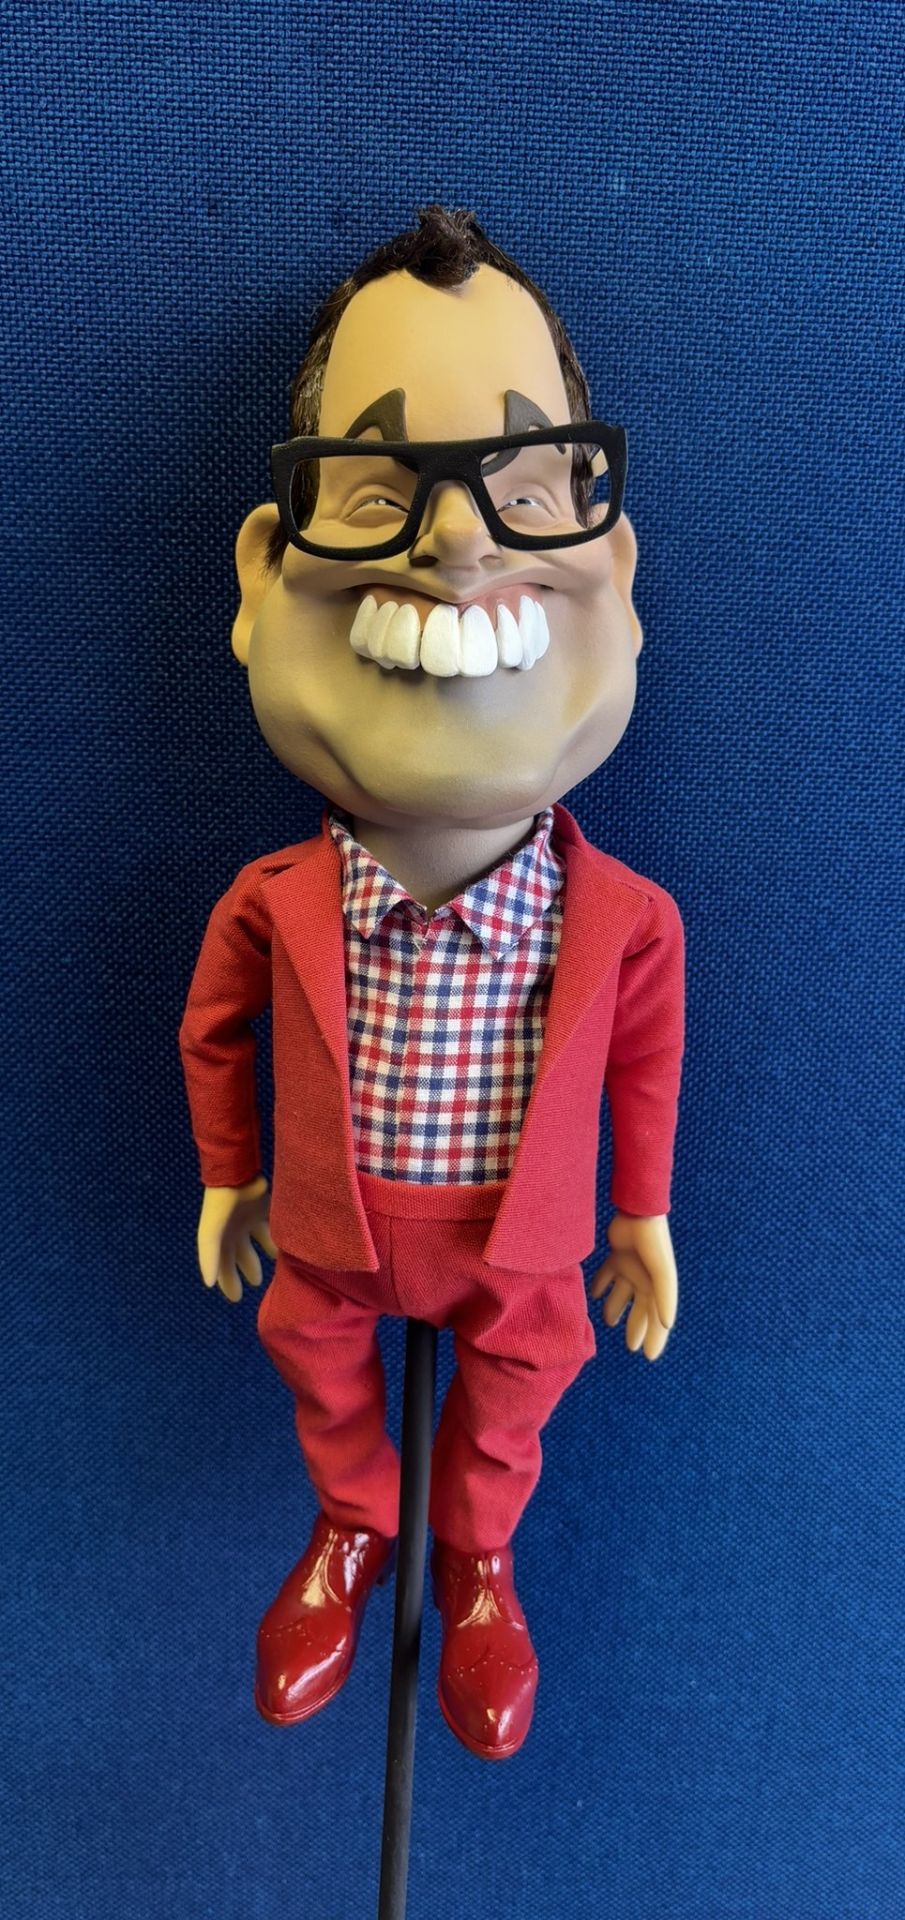 Newzoid puppet - Alan Carr - Image 2 of 3